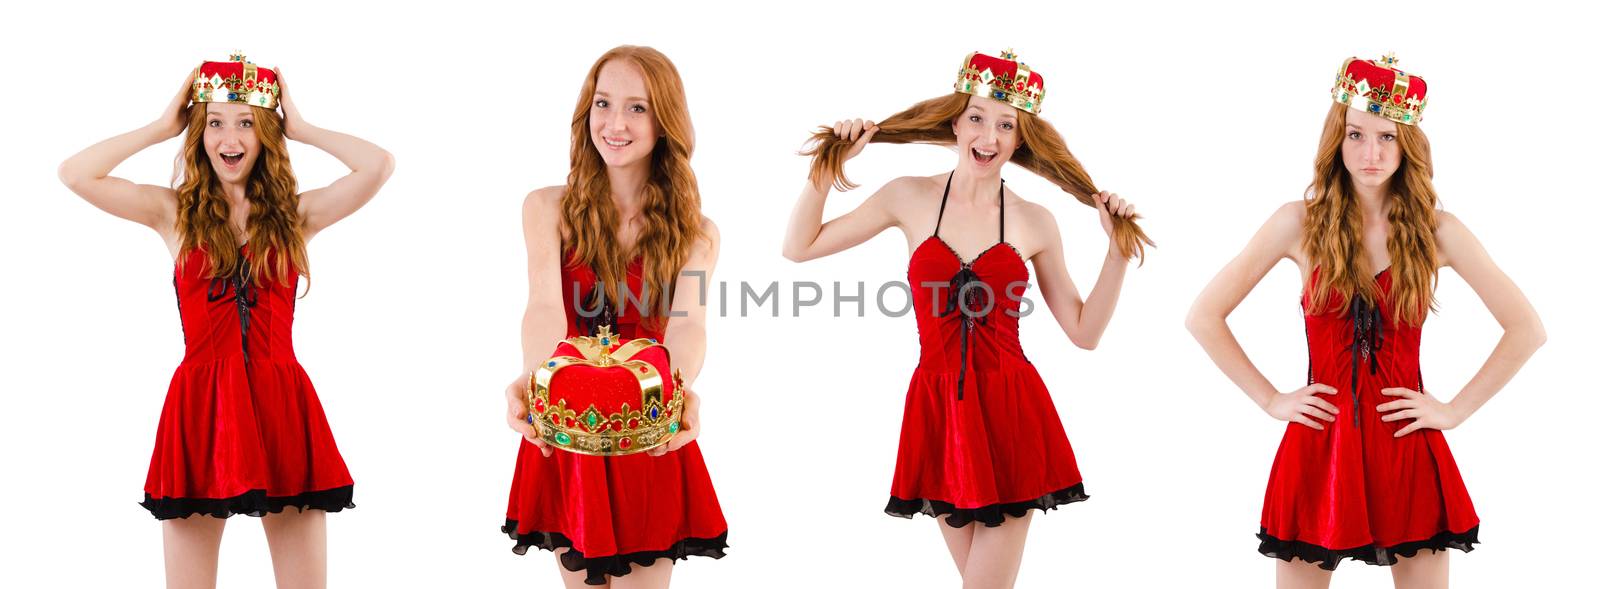 Redhead girl with crown isolated on white by Elnur